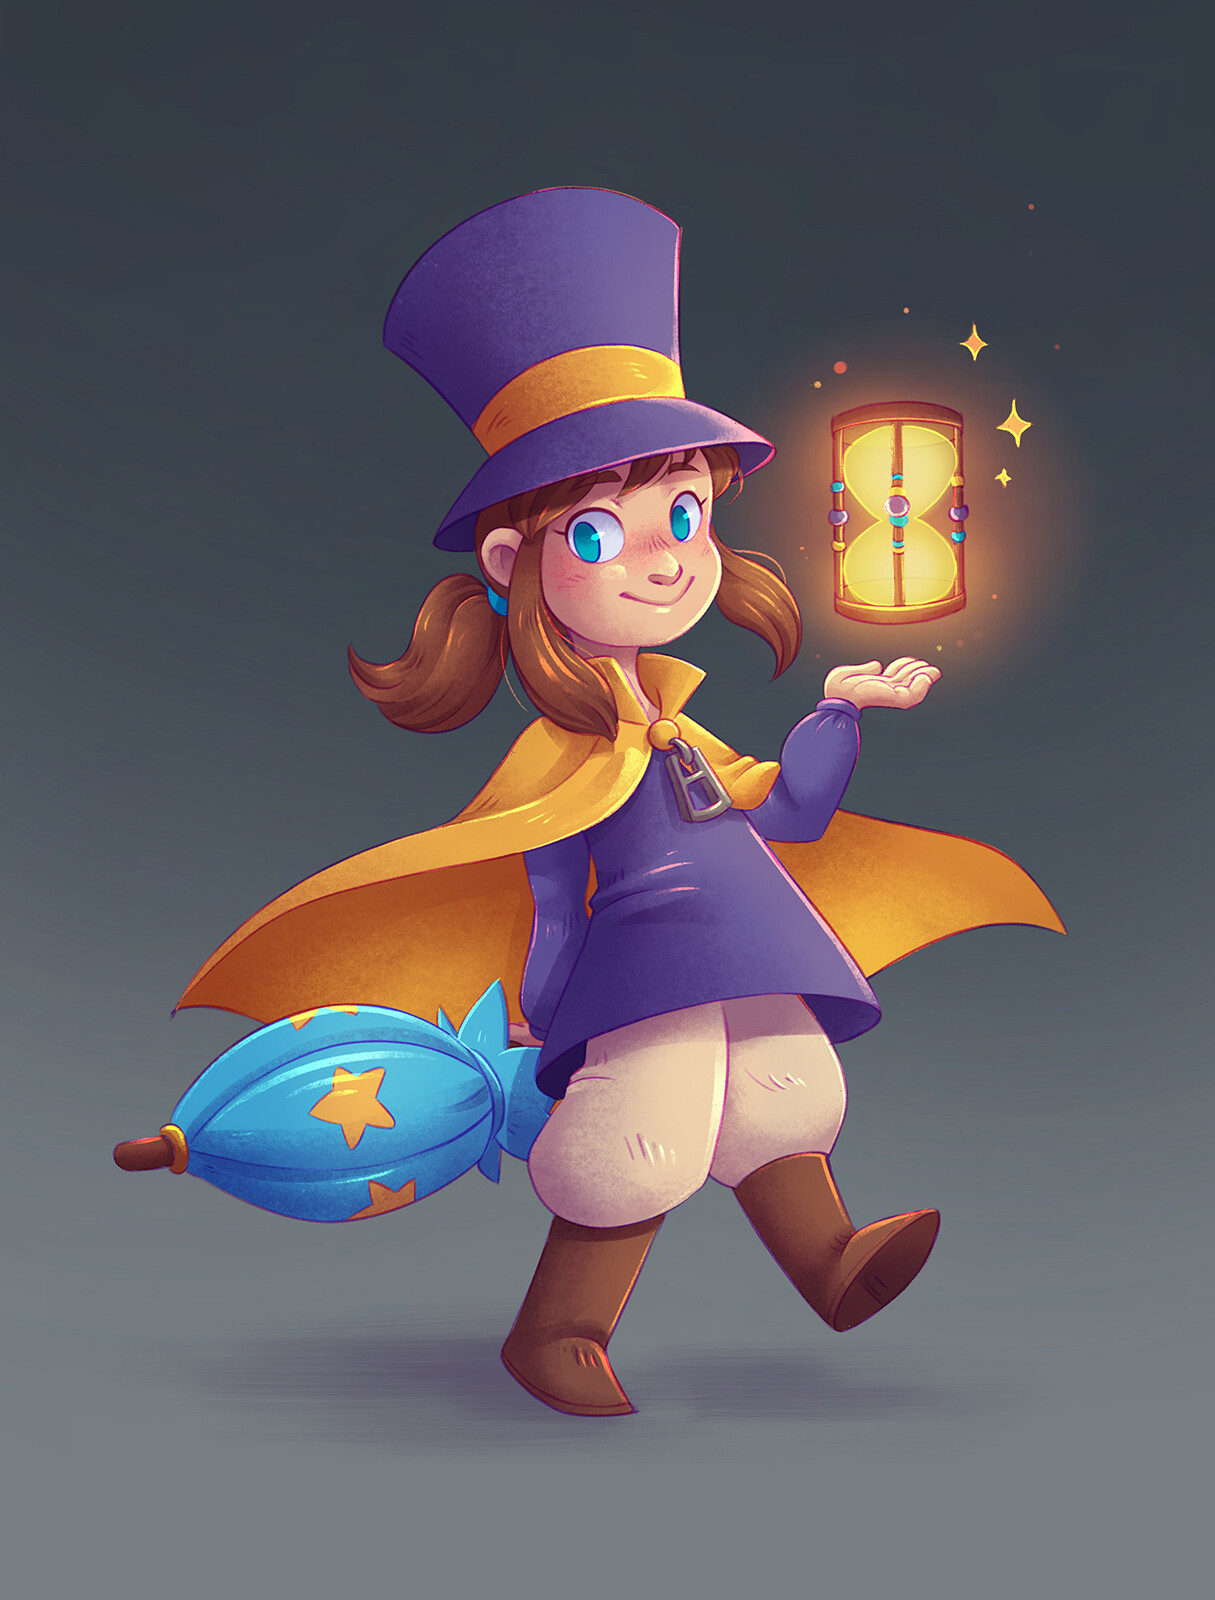 A Hat In Time - Humble Games